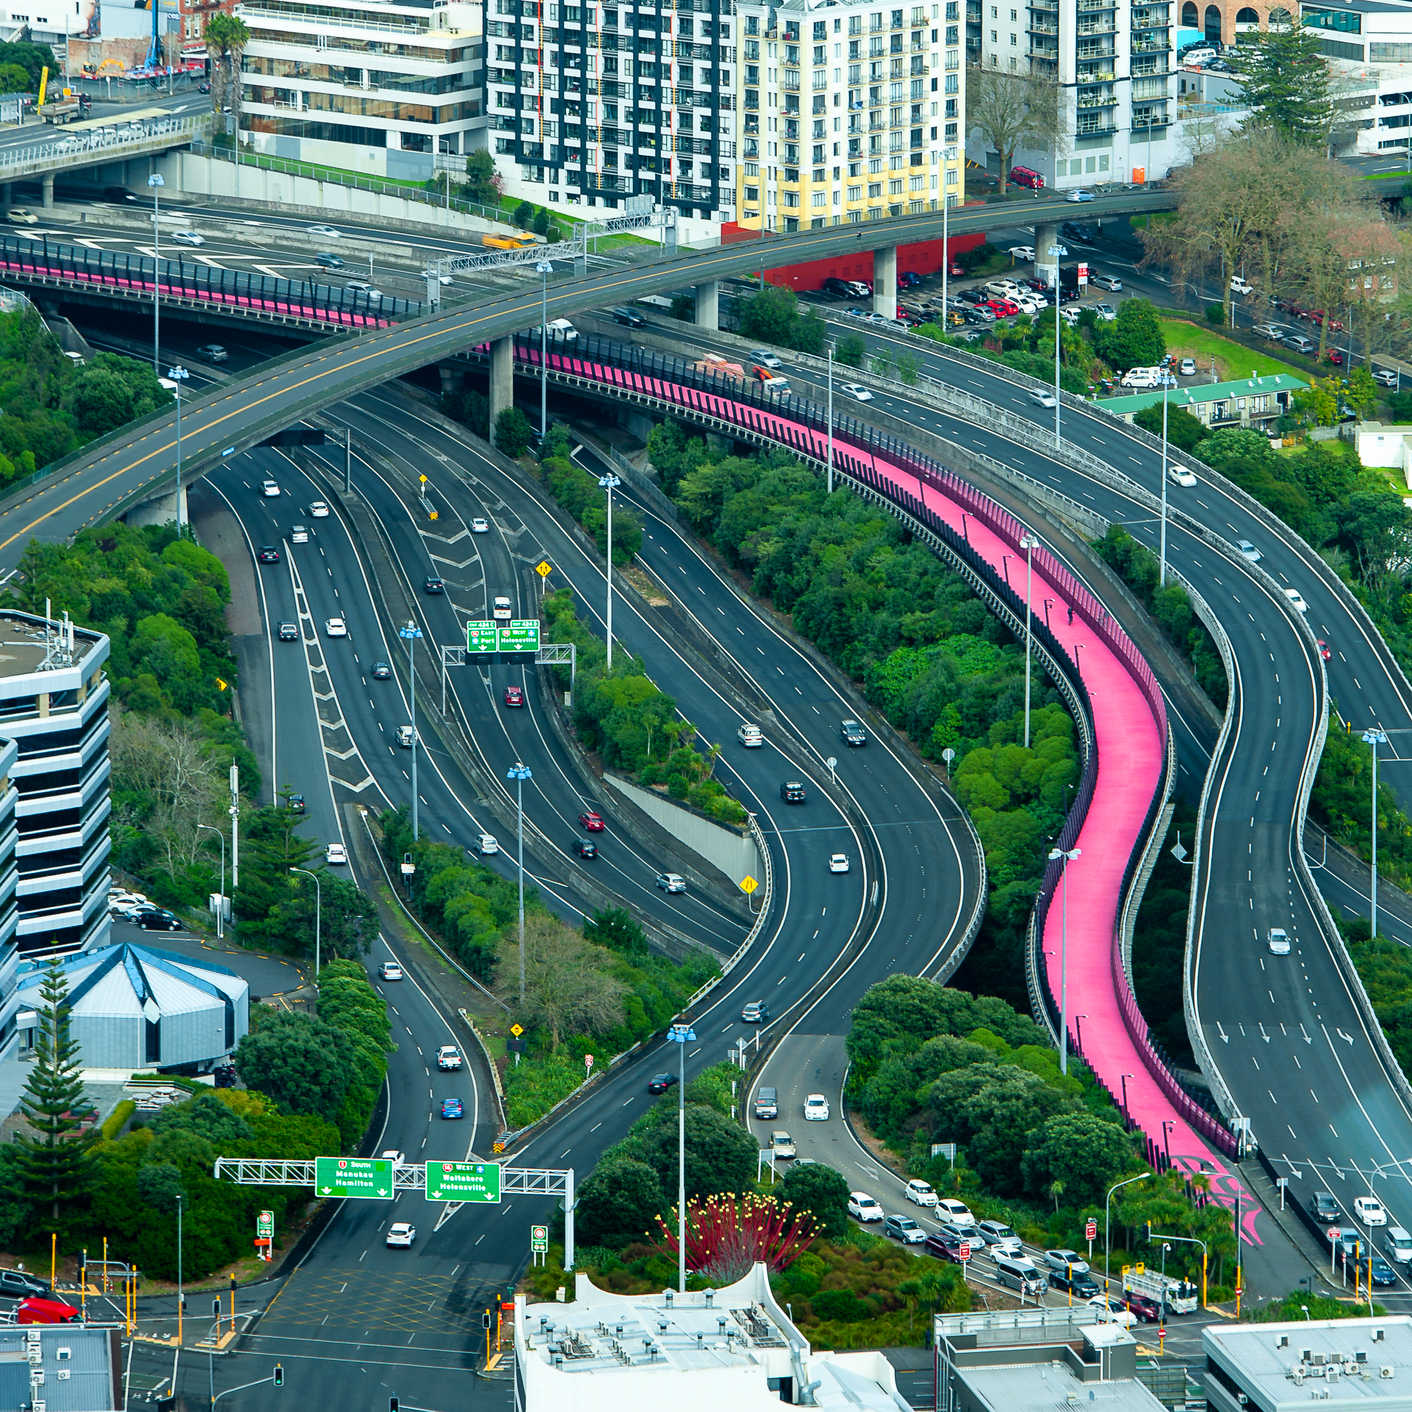 Aerial view from the Auckland`s Skytower observation deck to the Nelson Street pink cycleway, named Te Ara (Whiti or Lightpath), New Zealand